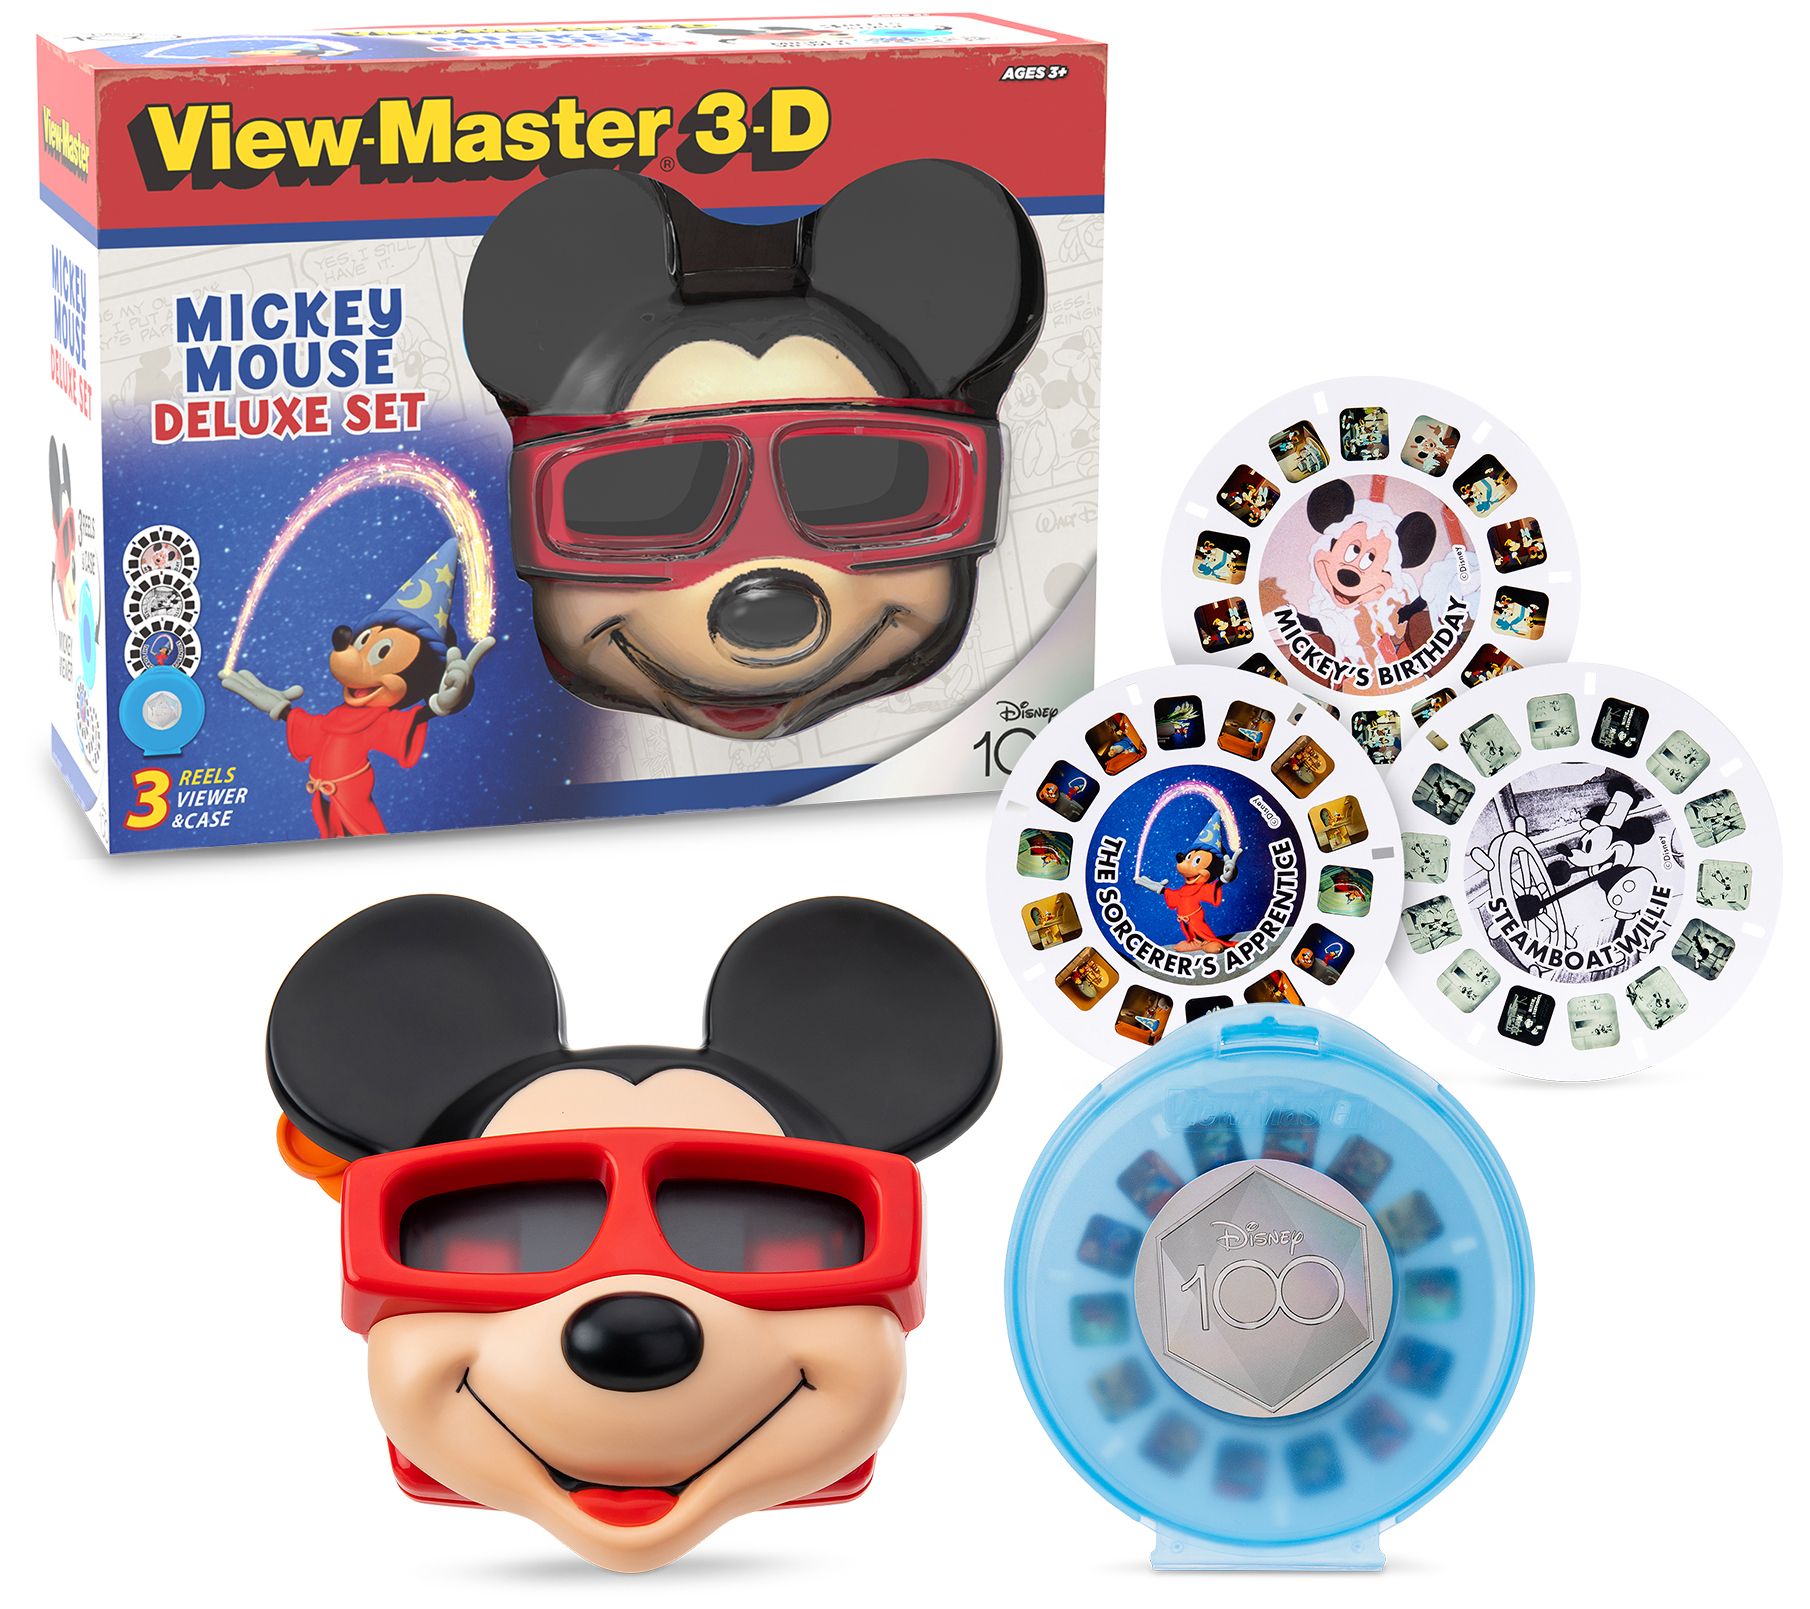 View Master Classic Reels